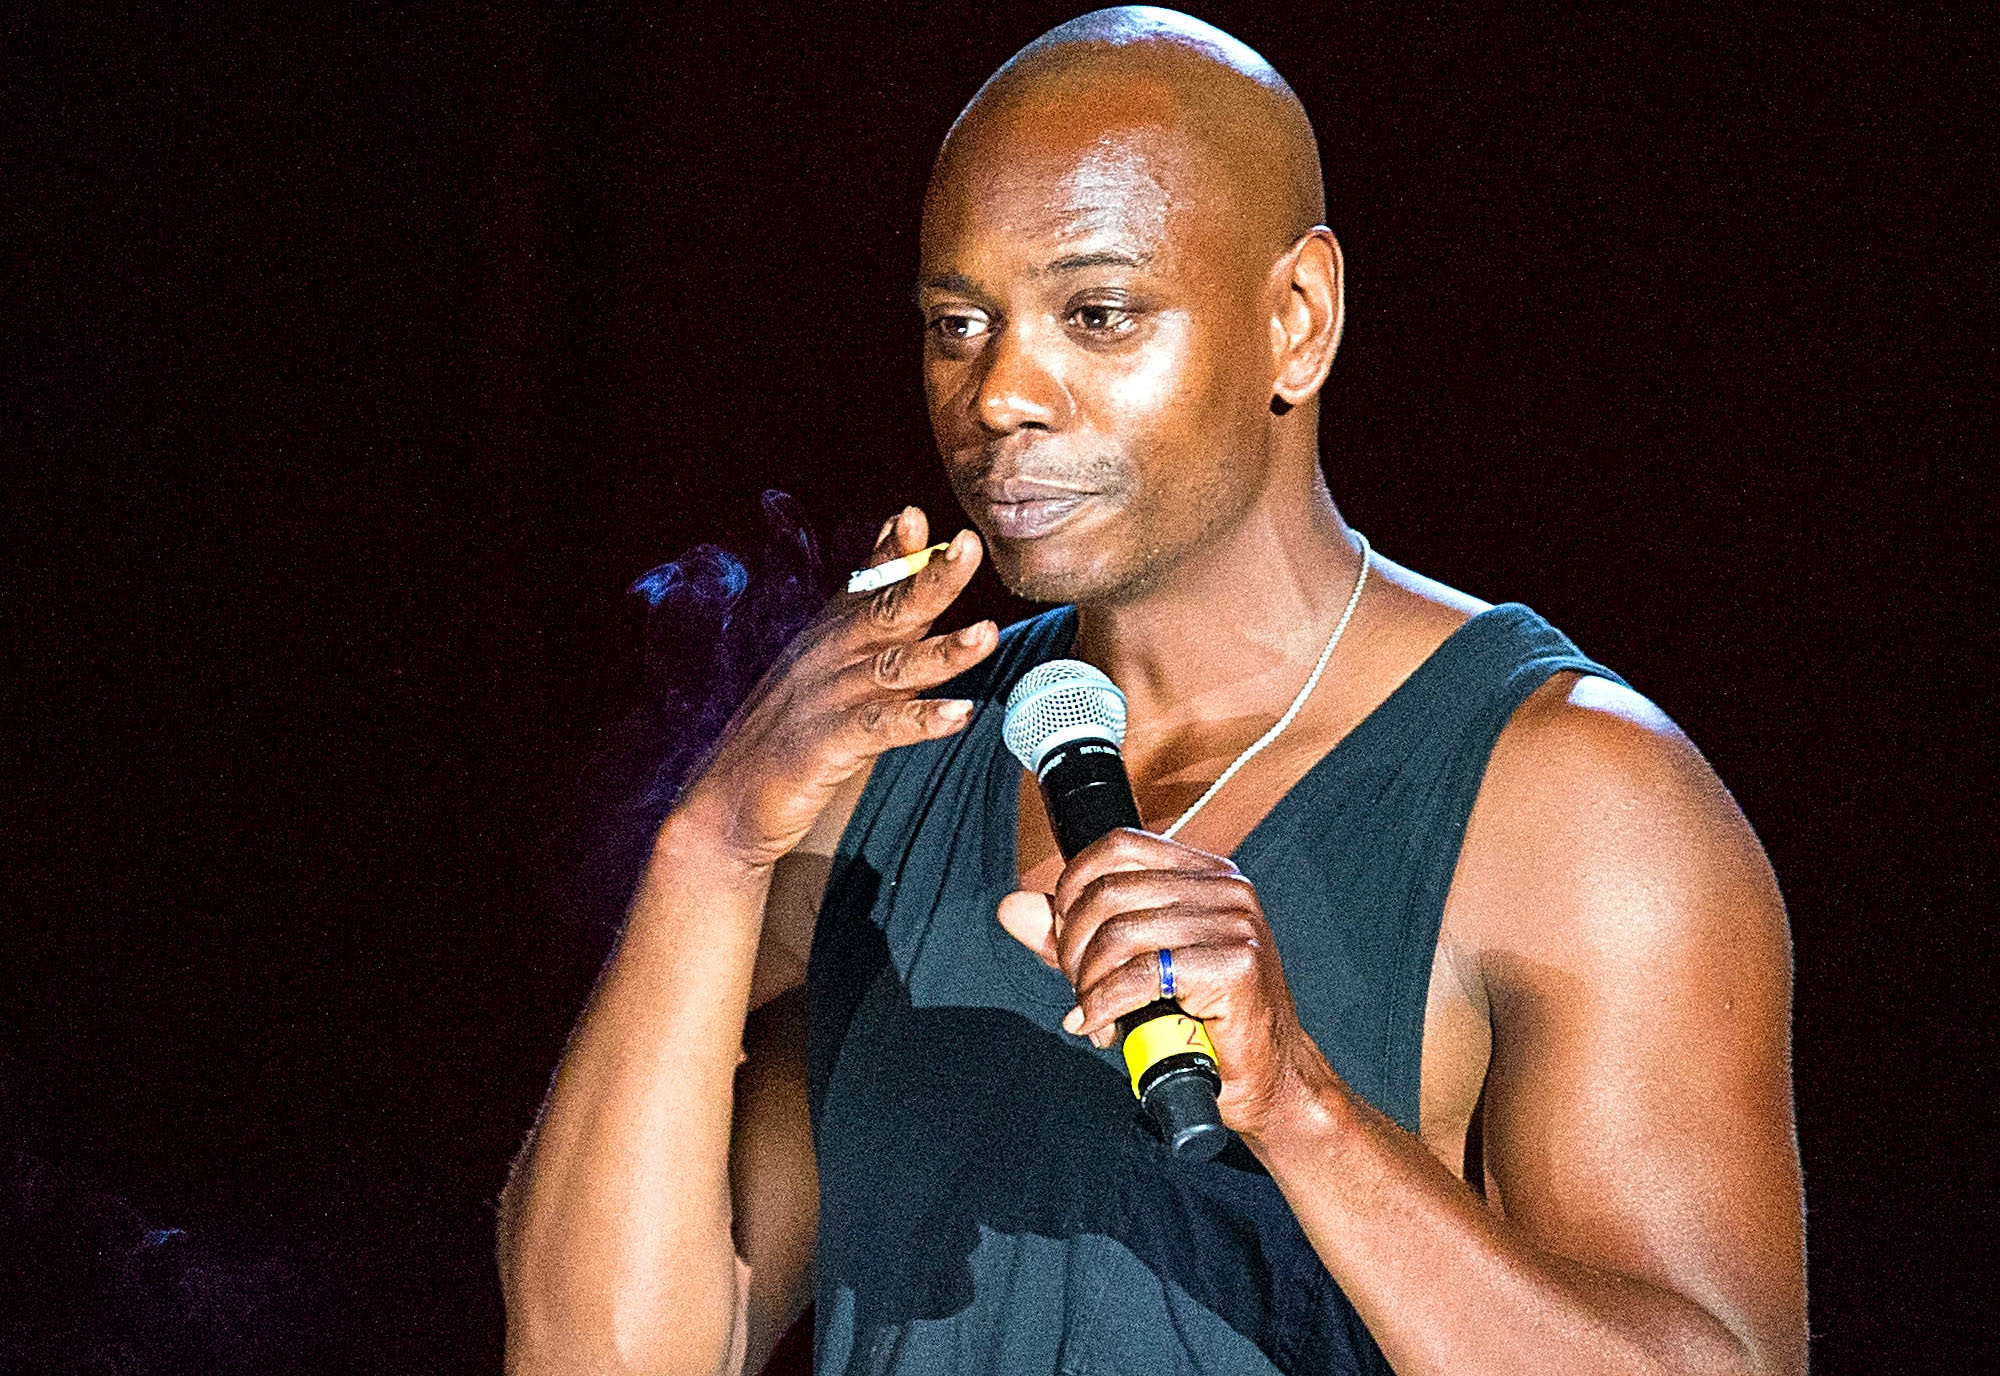 Dave Chappelle As Prince Quotes.